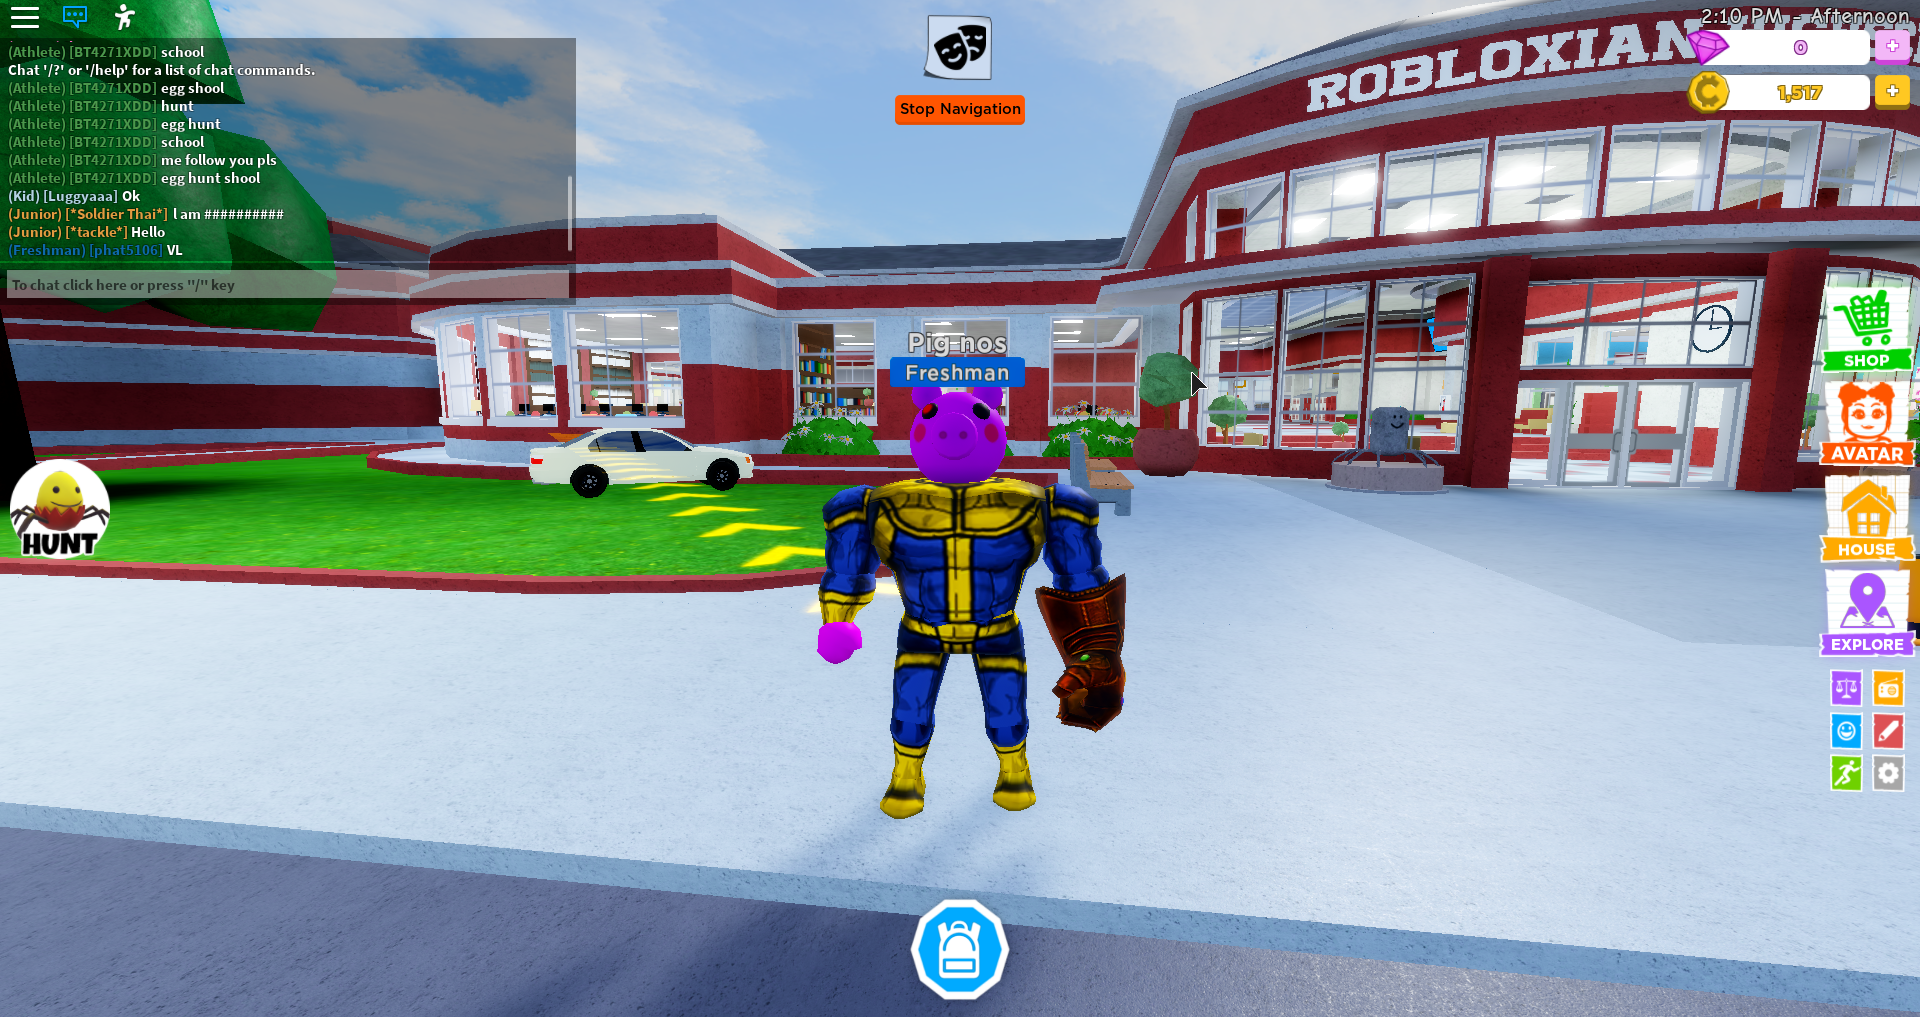 How To Make Sans In Roblox High School Tix Robux On Roblox